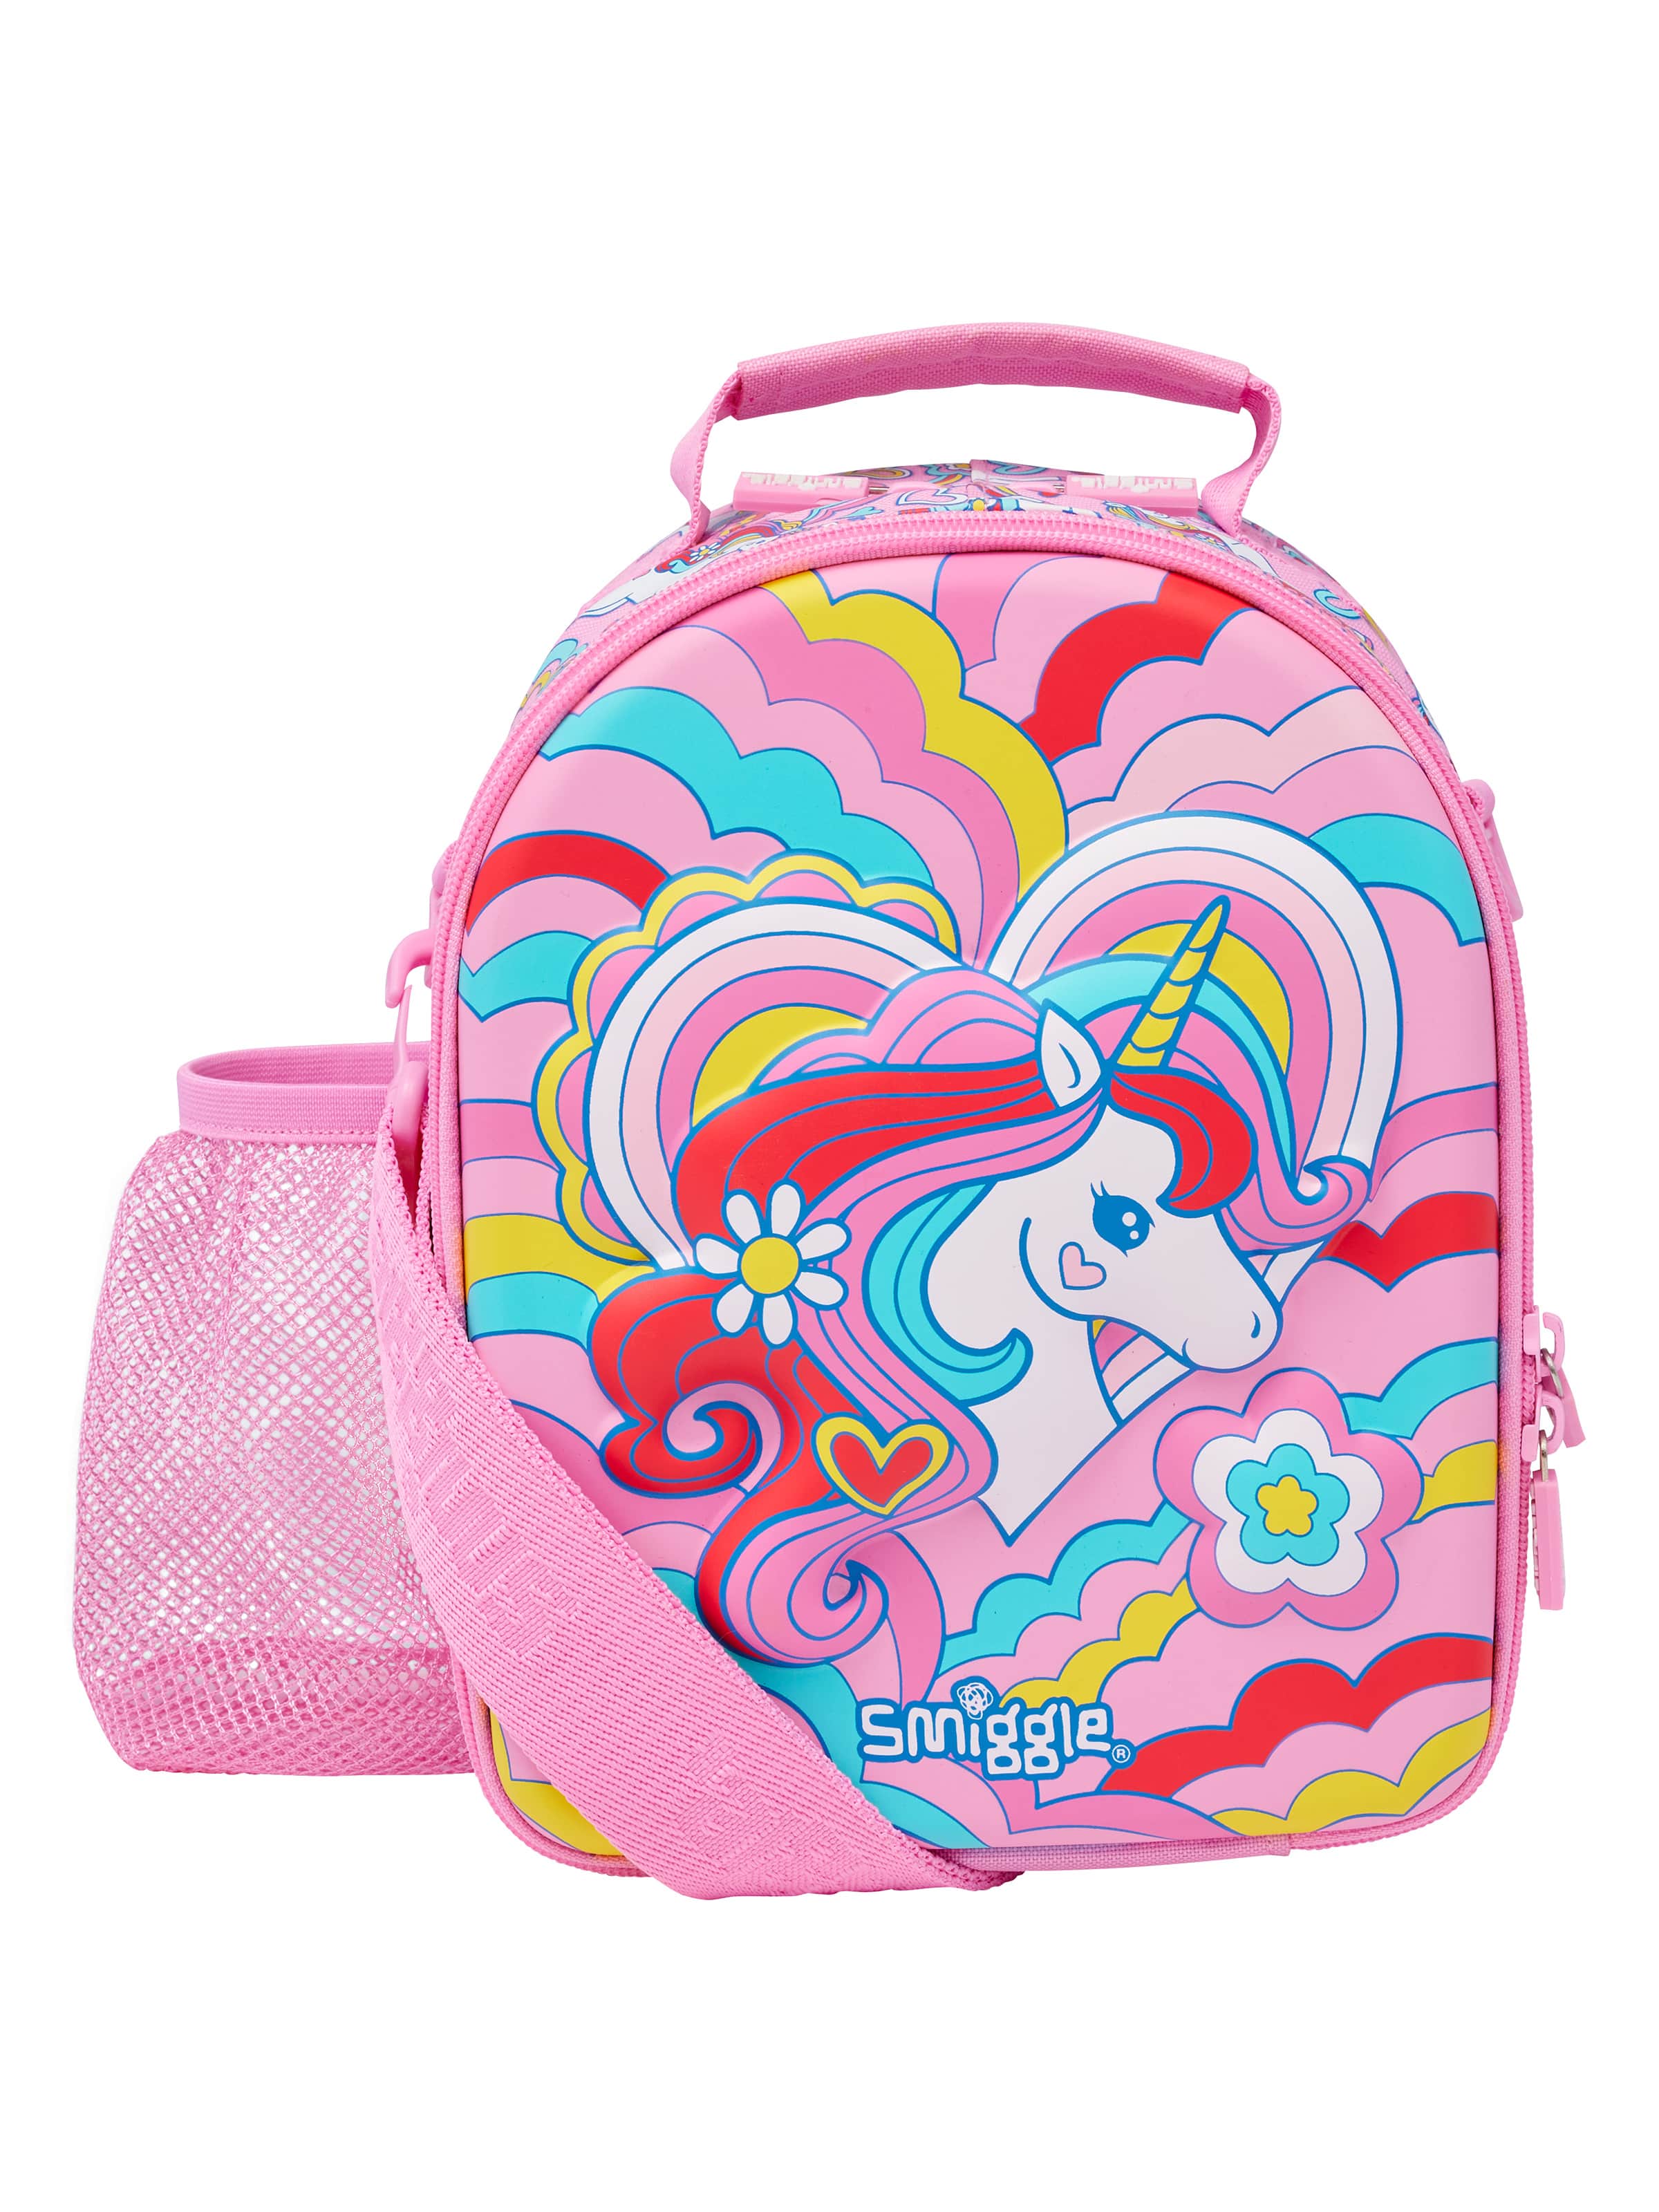 Buy IvyH Kids Lunch Bag with Bottle Holder, Children Lunch Box with 3  Compartments, Unicorn Girls Insulated Lunchbox Bag Tote for School Travel  Snacks Carrier, Pink Online at Low Prices in India -